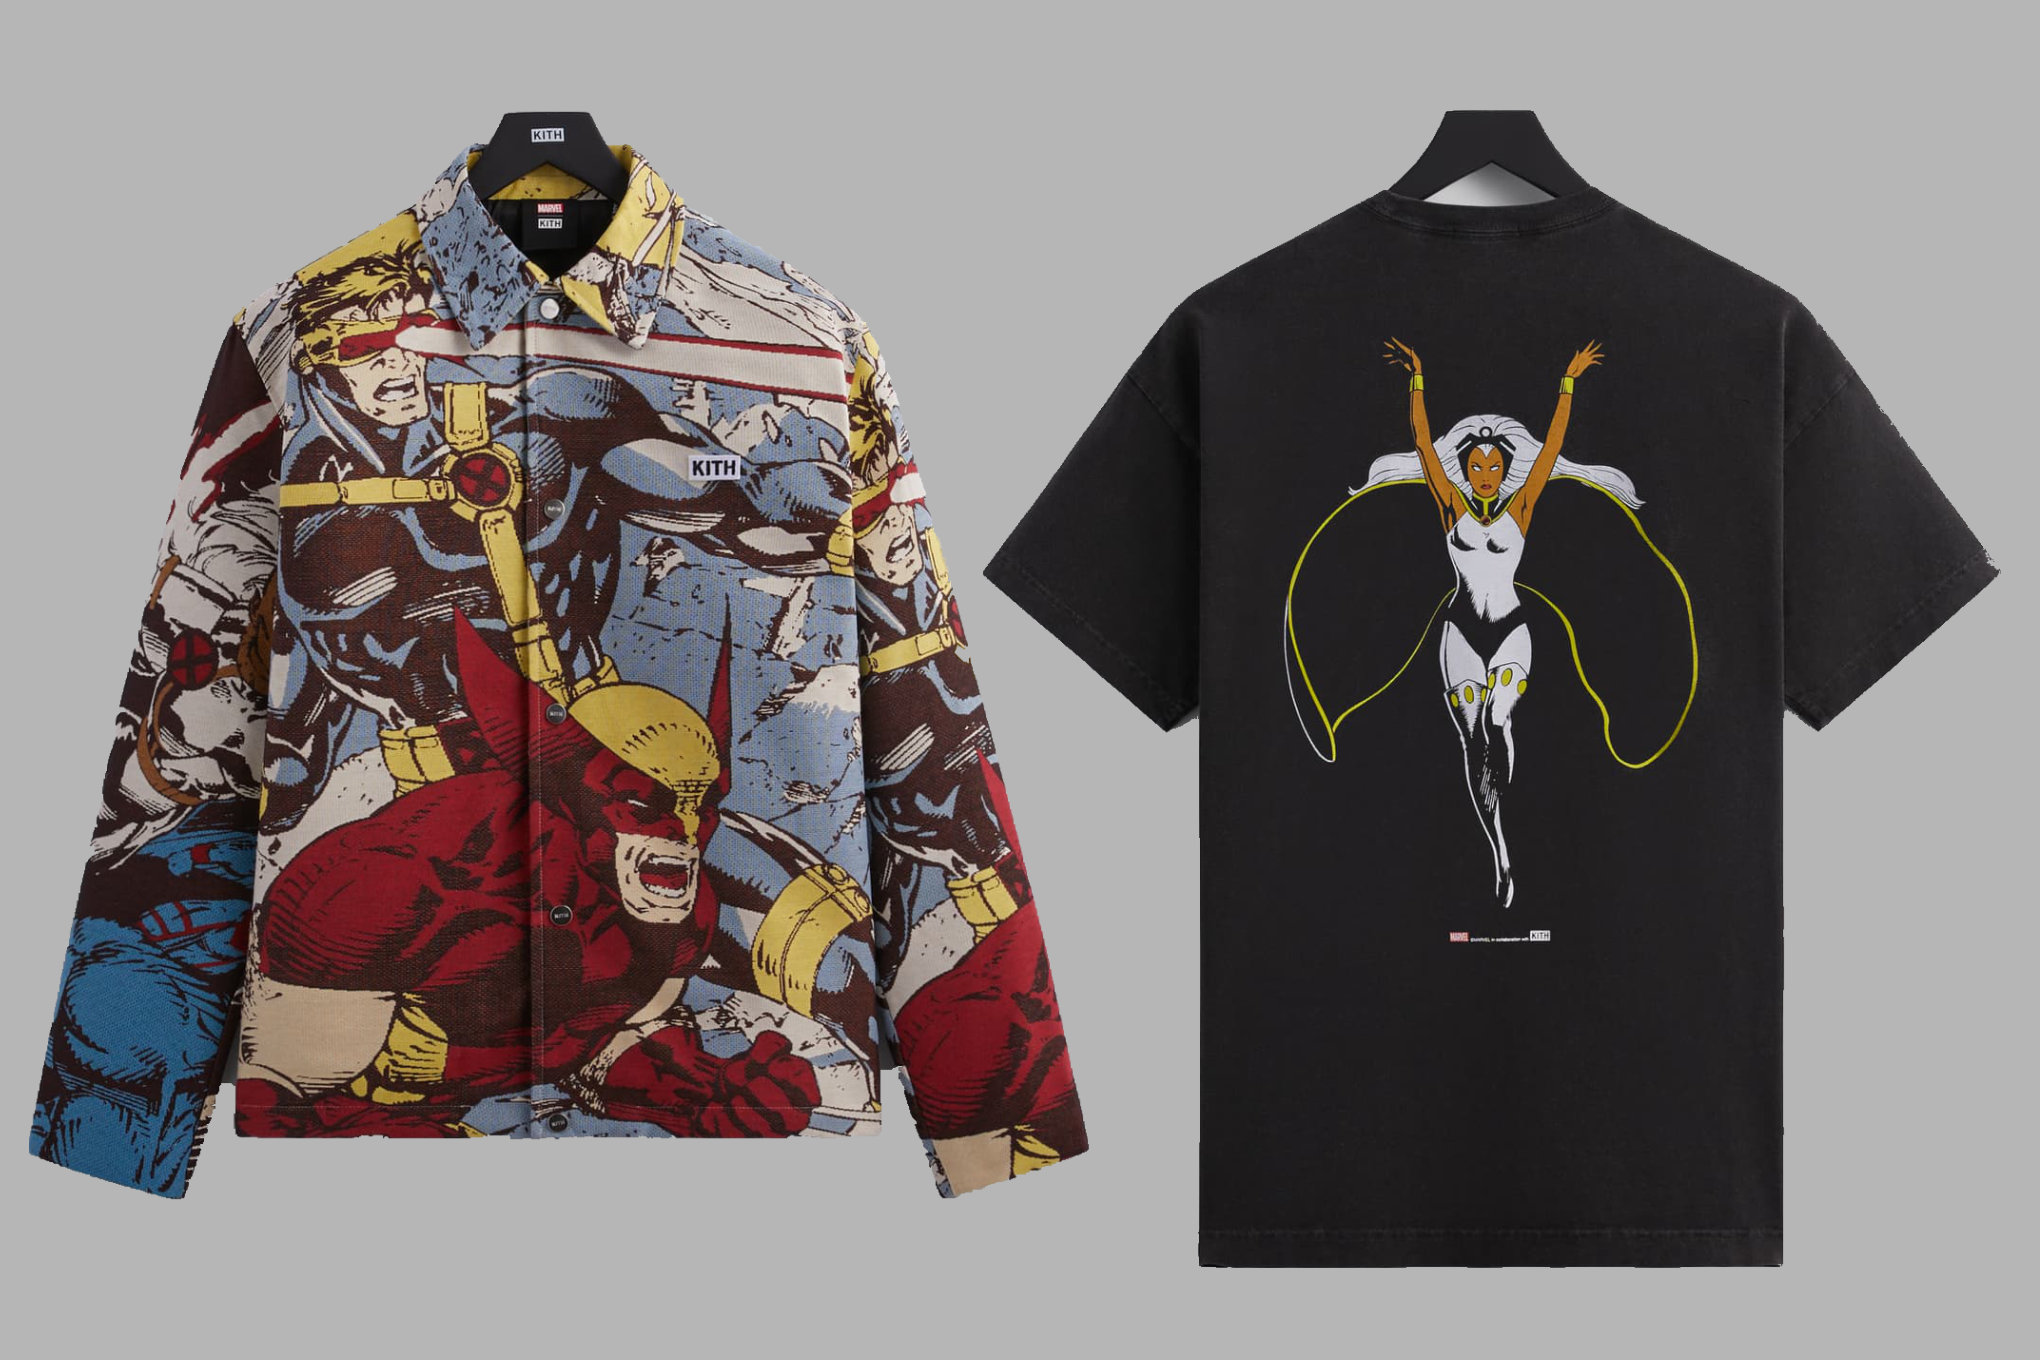 An image featuring an X-Men inspired jacket and T-shirt made by Kith in collaboration with Marvel.